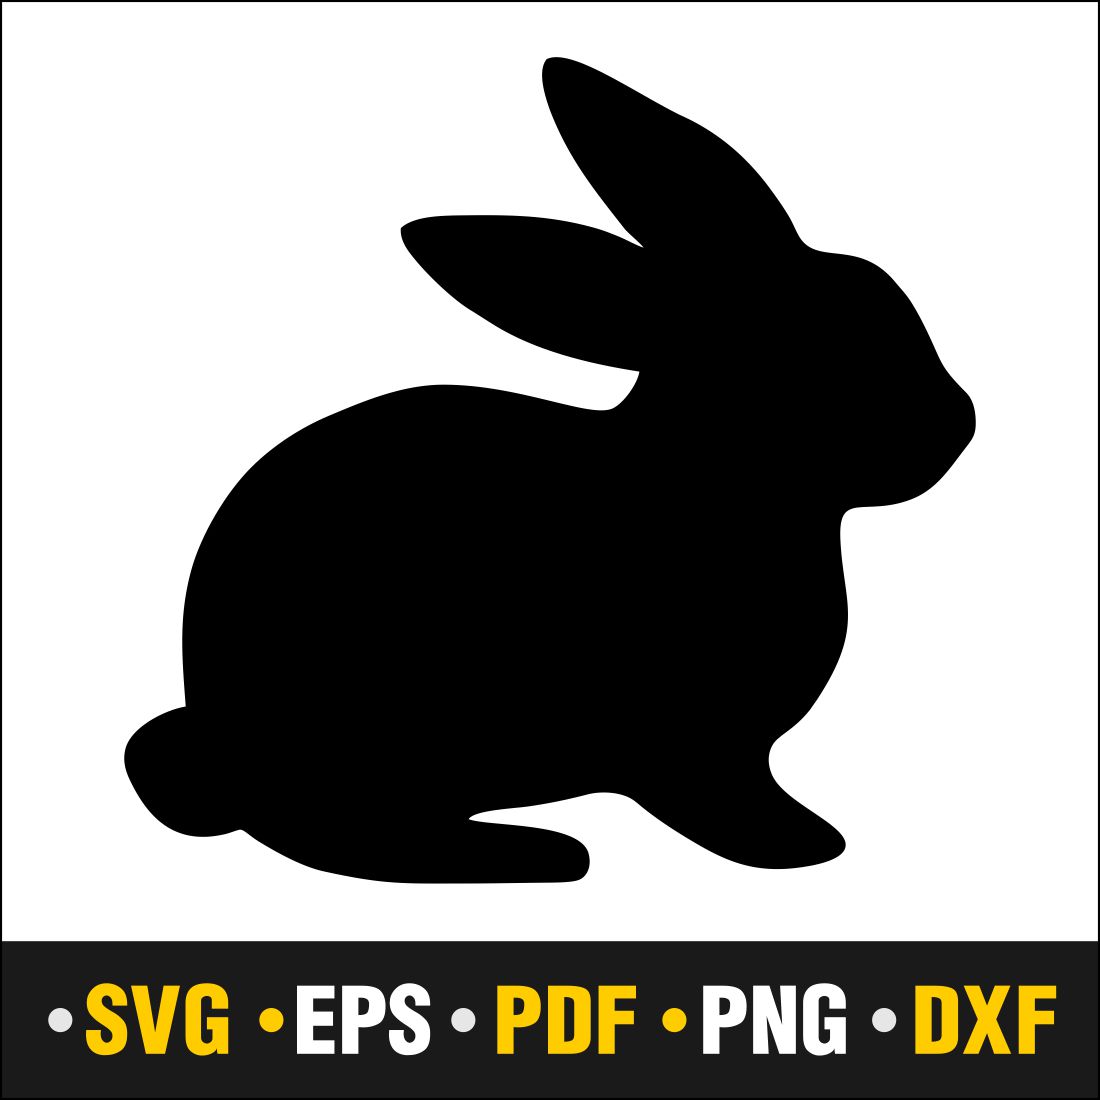 Easter Bunny SVG, Rabbit, Bunny Svg, Vector Cut file Cricut, Silhouette , PDF, PNG, DXF, EPS - Only $3 cover image.